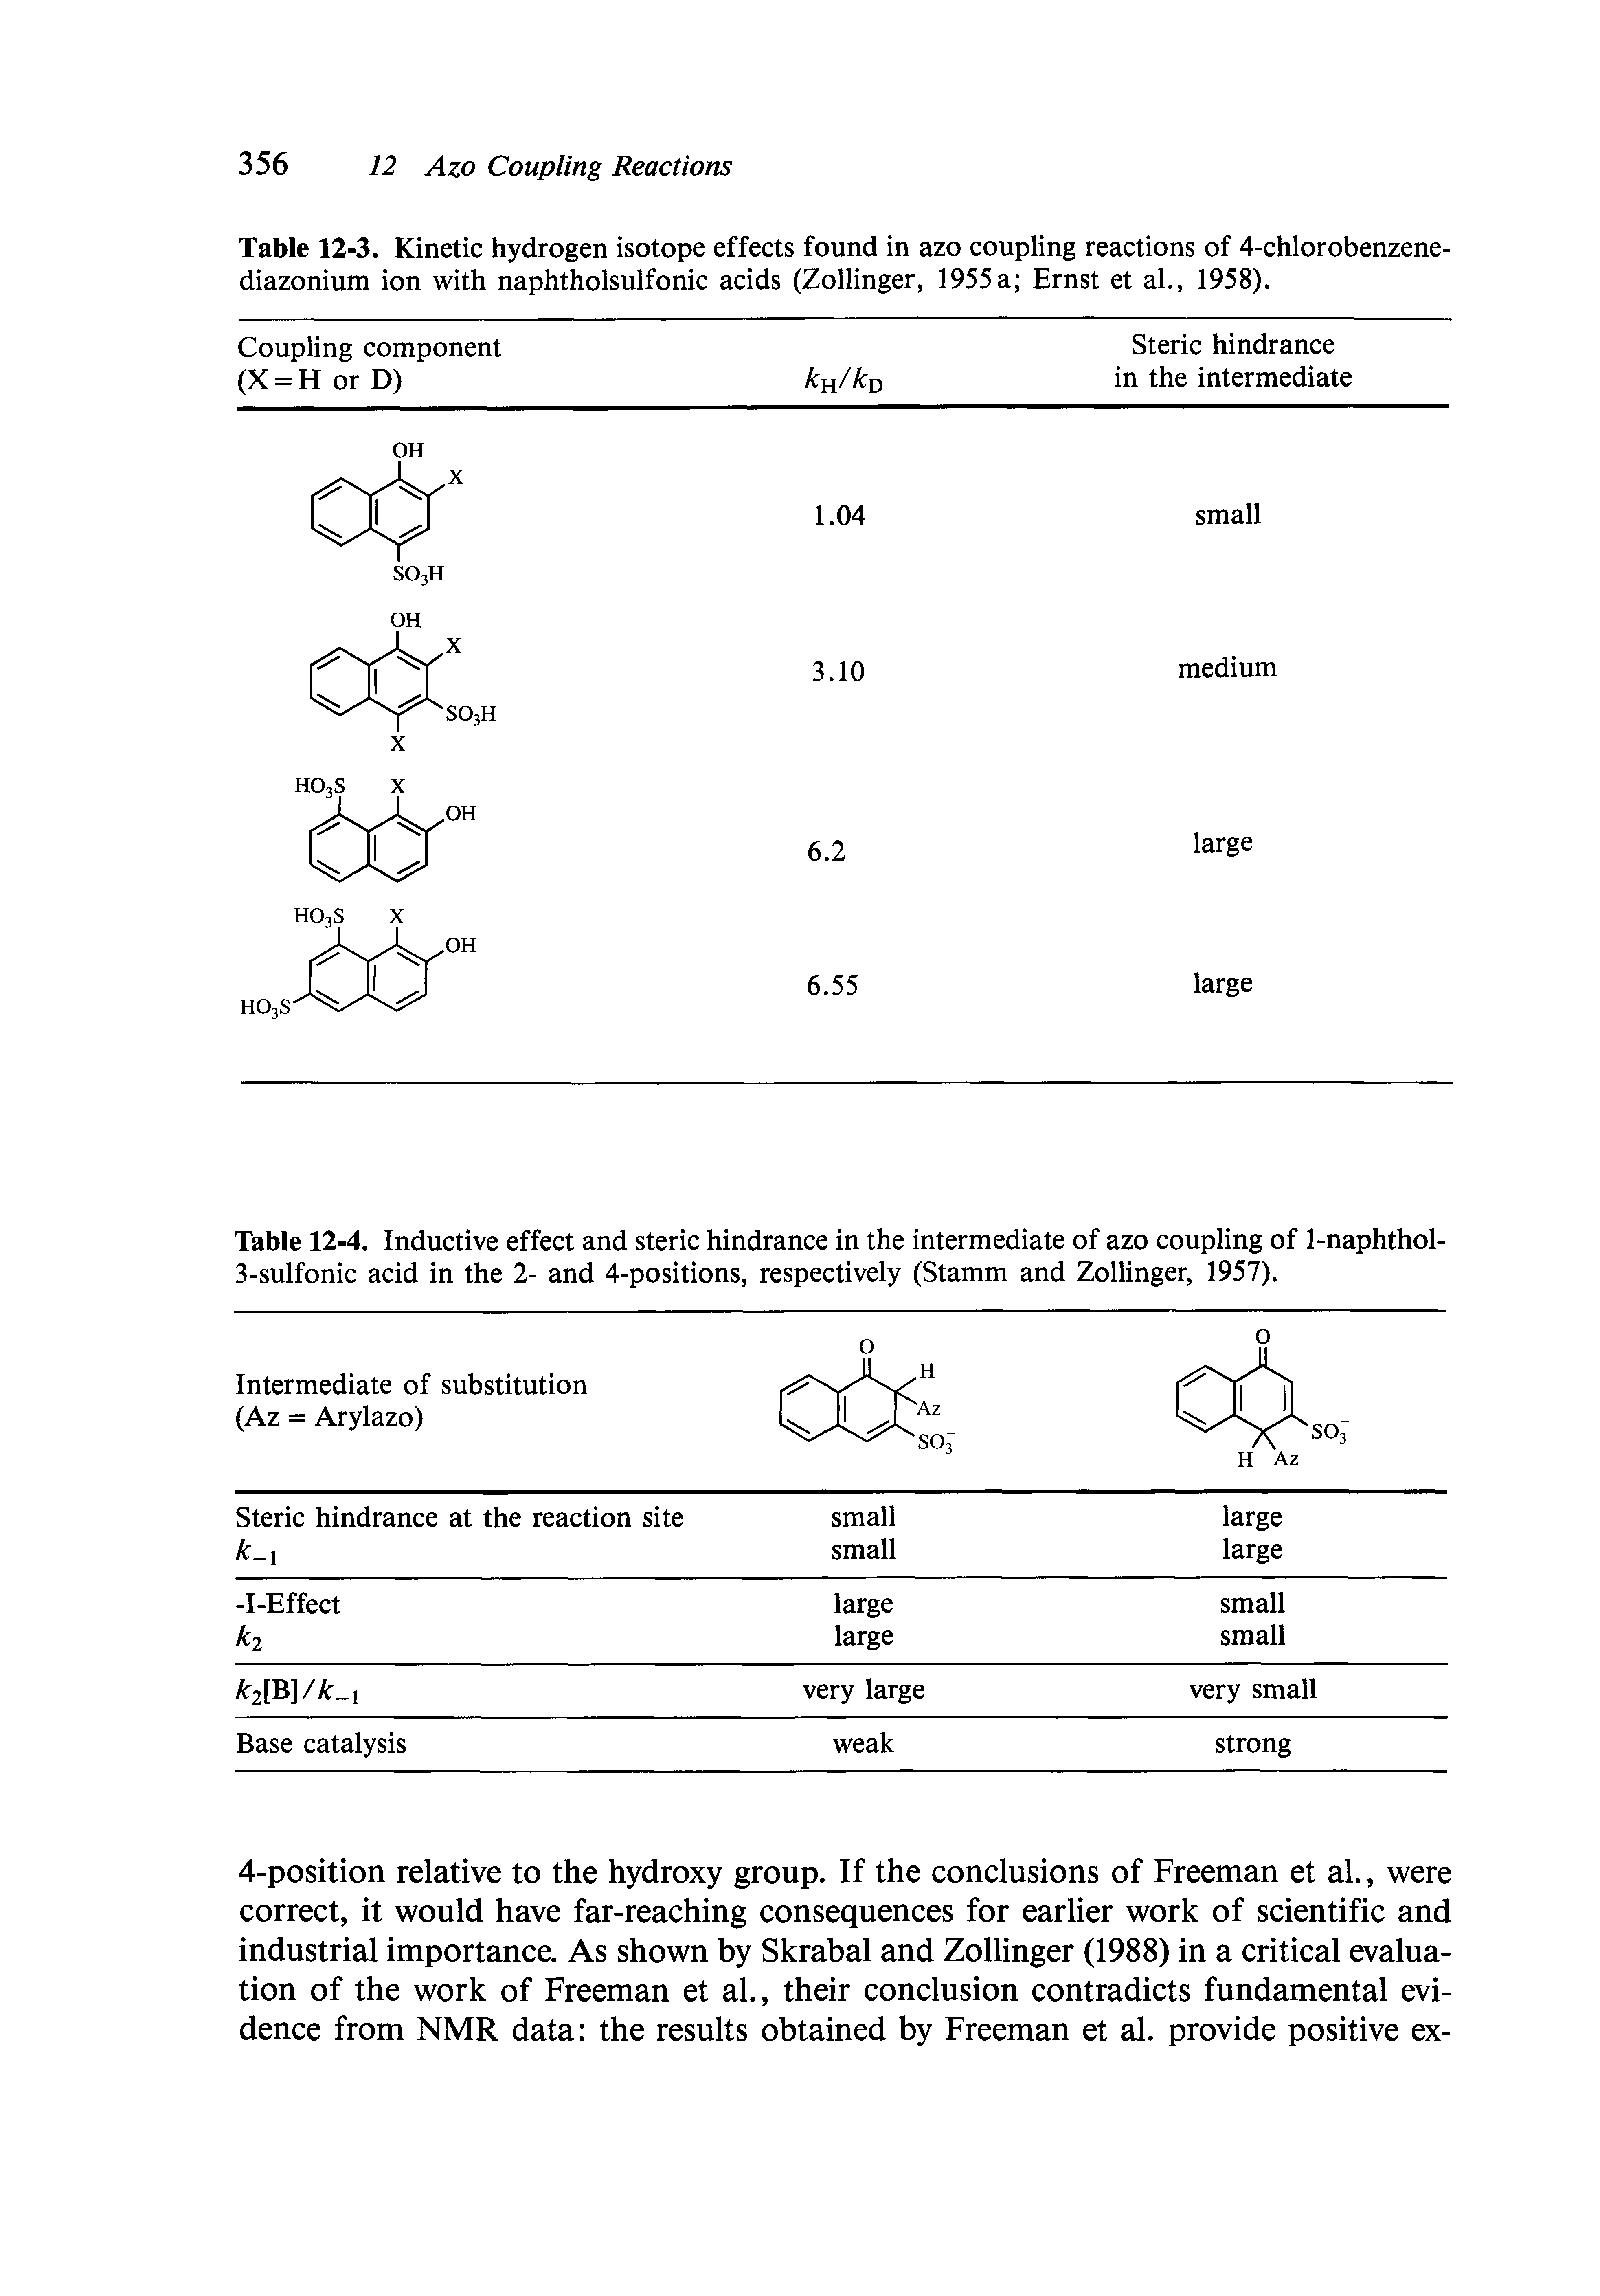 Table 12-3. Kinetic hydrogen isotope effects found in azo coupling reactions of 4-chlorobenzene-diazonium ion with naphtholsulfonic acids (Zollinger, 1955 a Ernst et al., 1958).